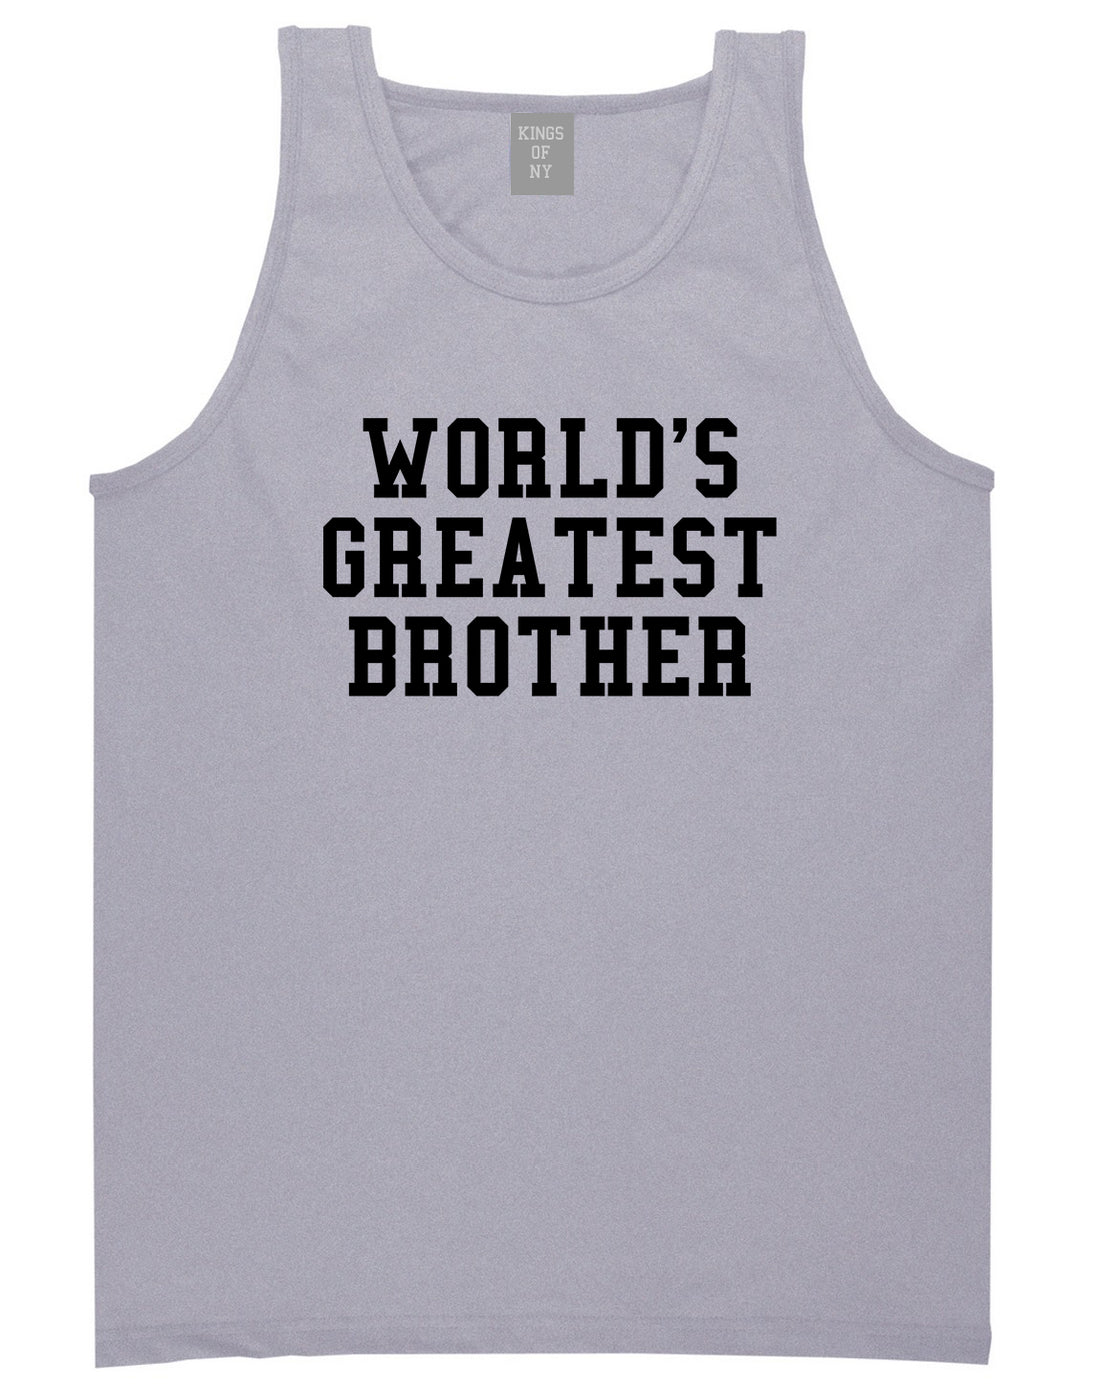 Worlds Greatest Brother Funny Birthday Mens Tank Top T-Shirt Grey